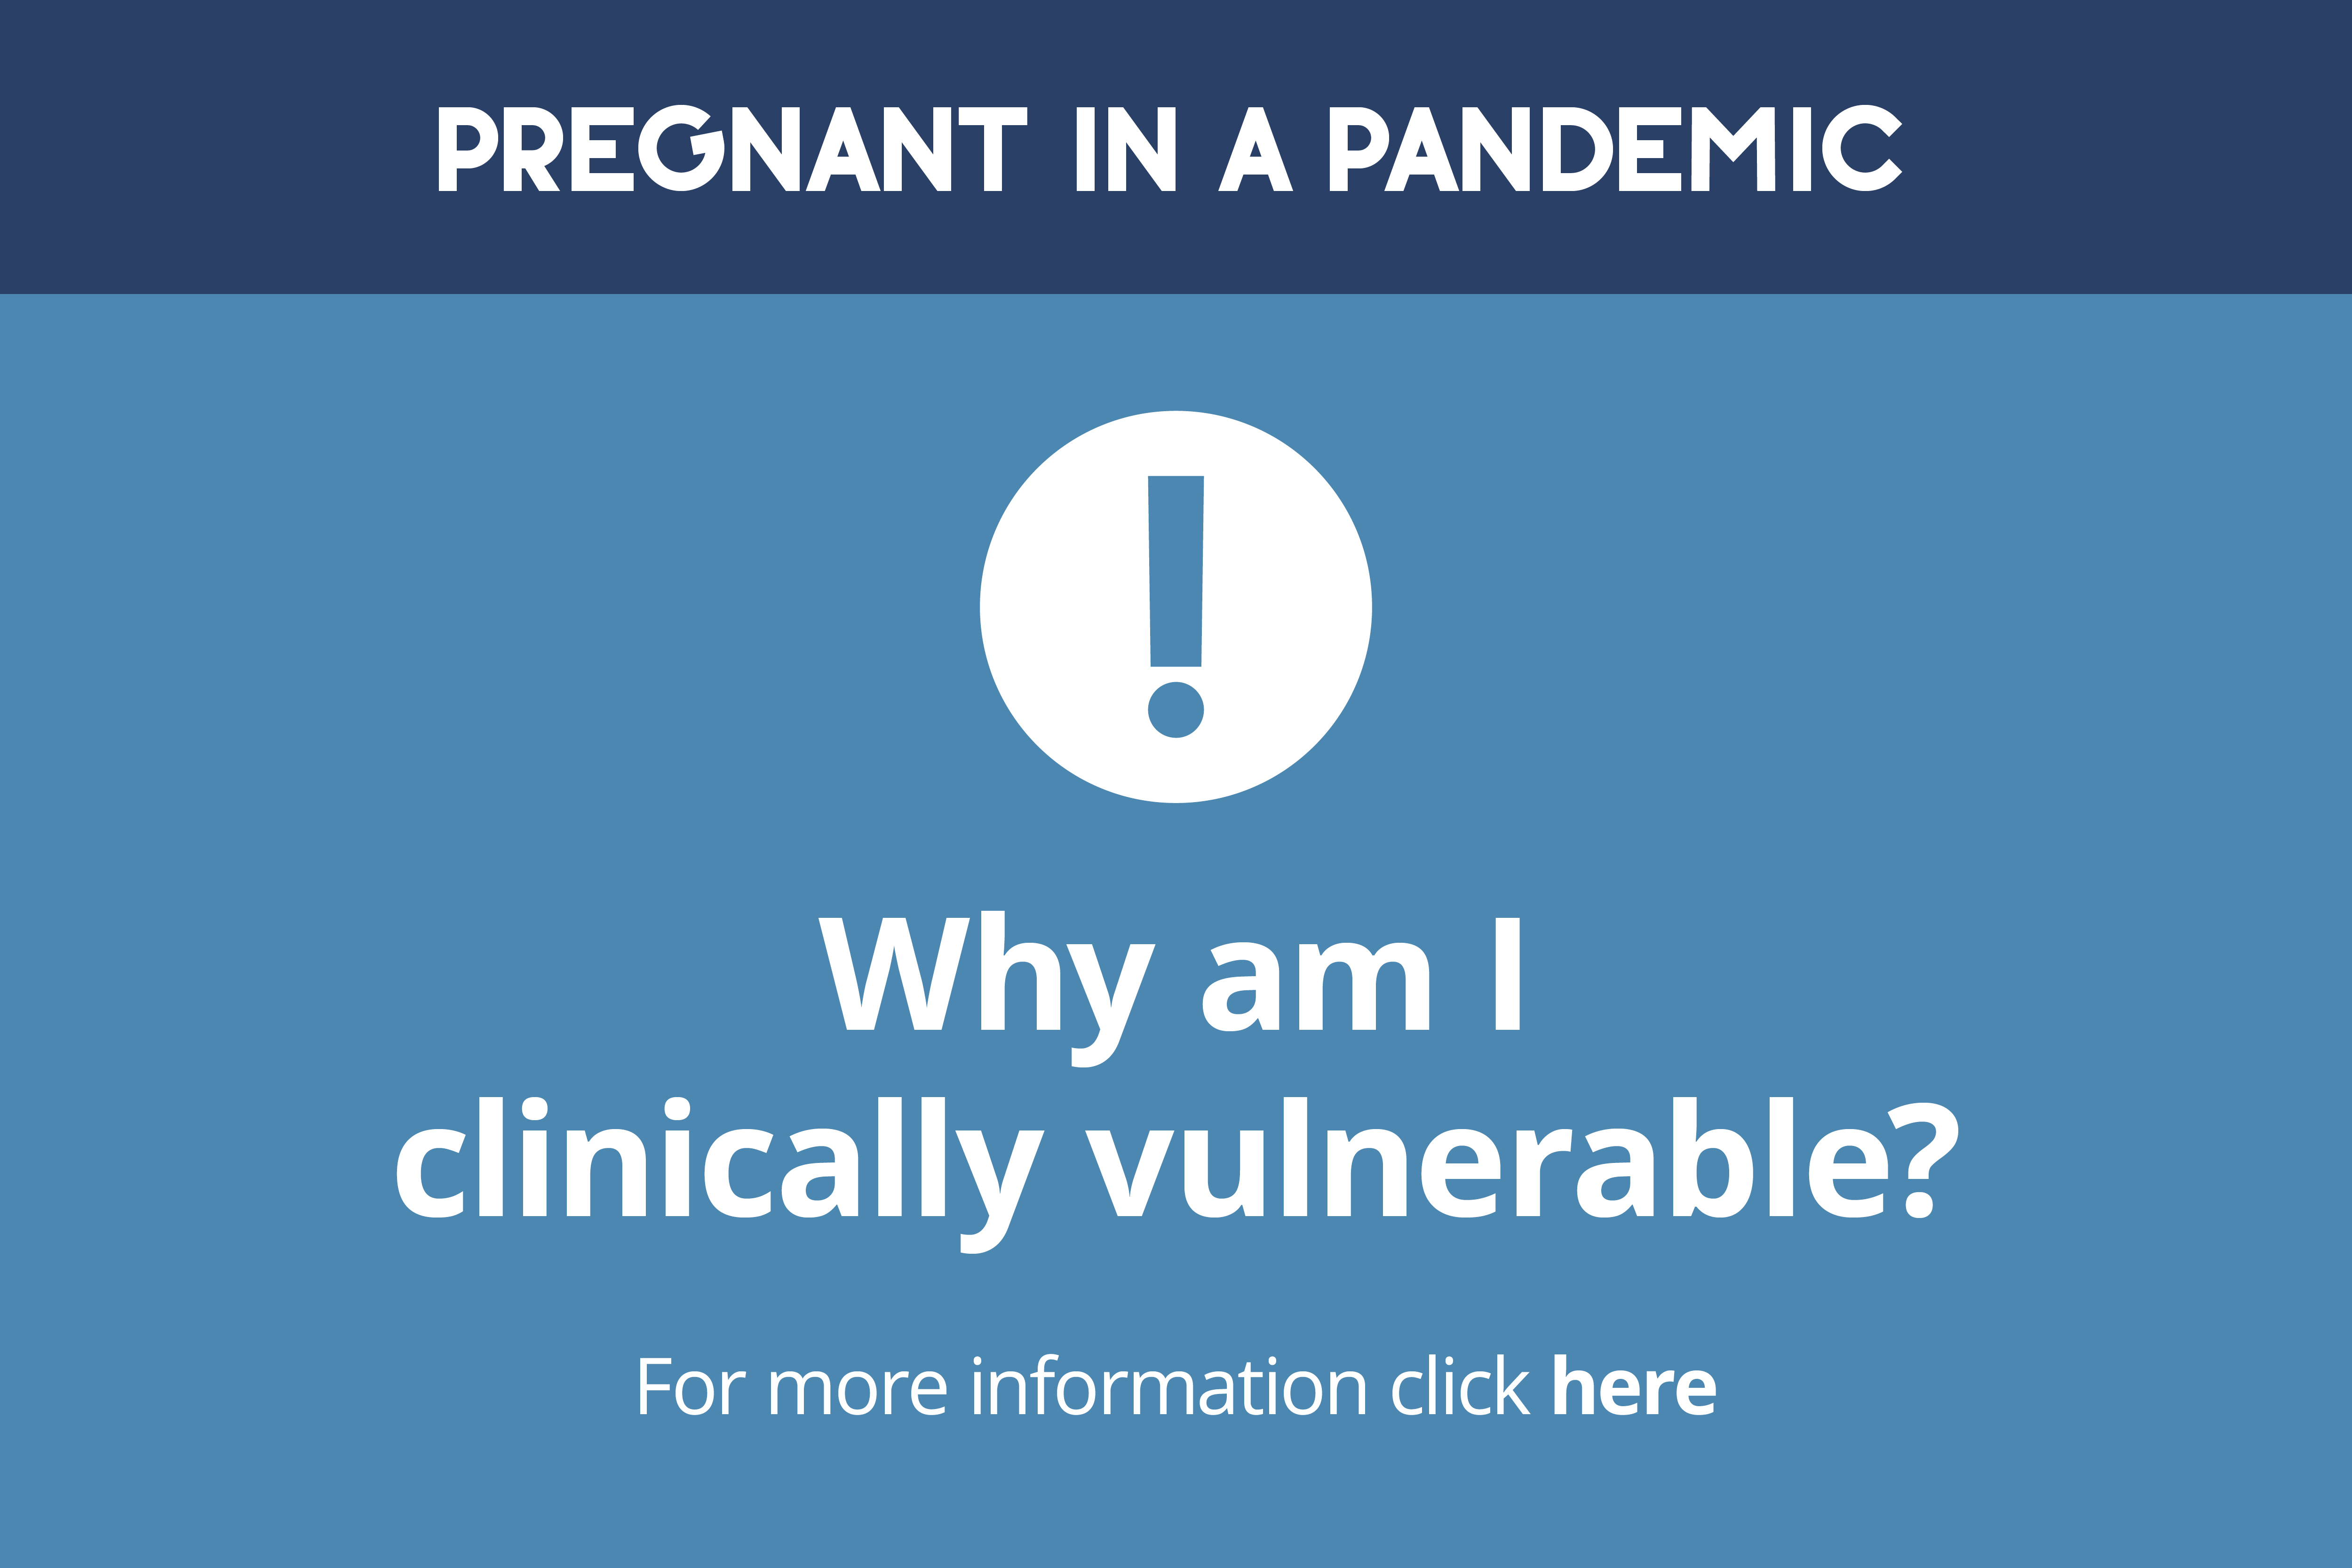 GIF displaying questions that pregnant women worry about in the pandemic. Click on this to access more information.